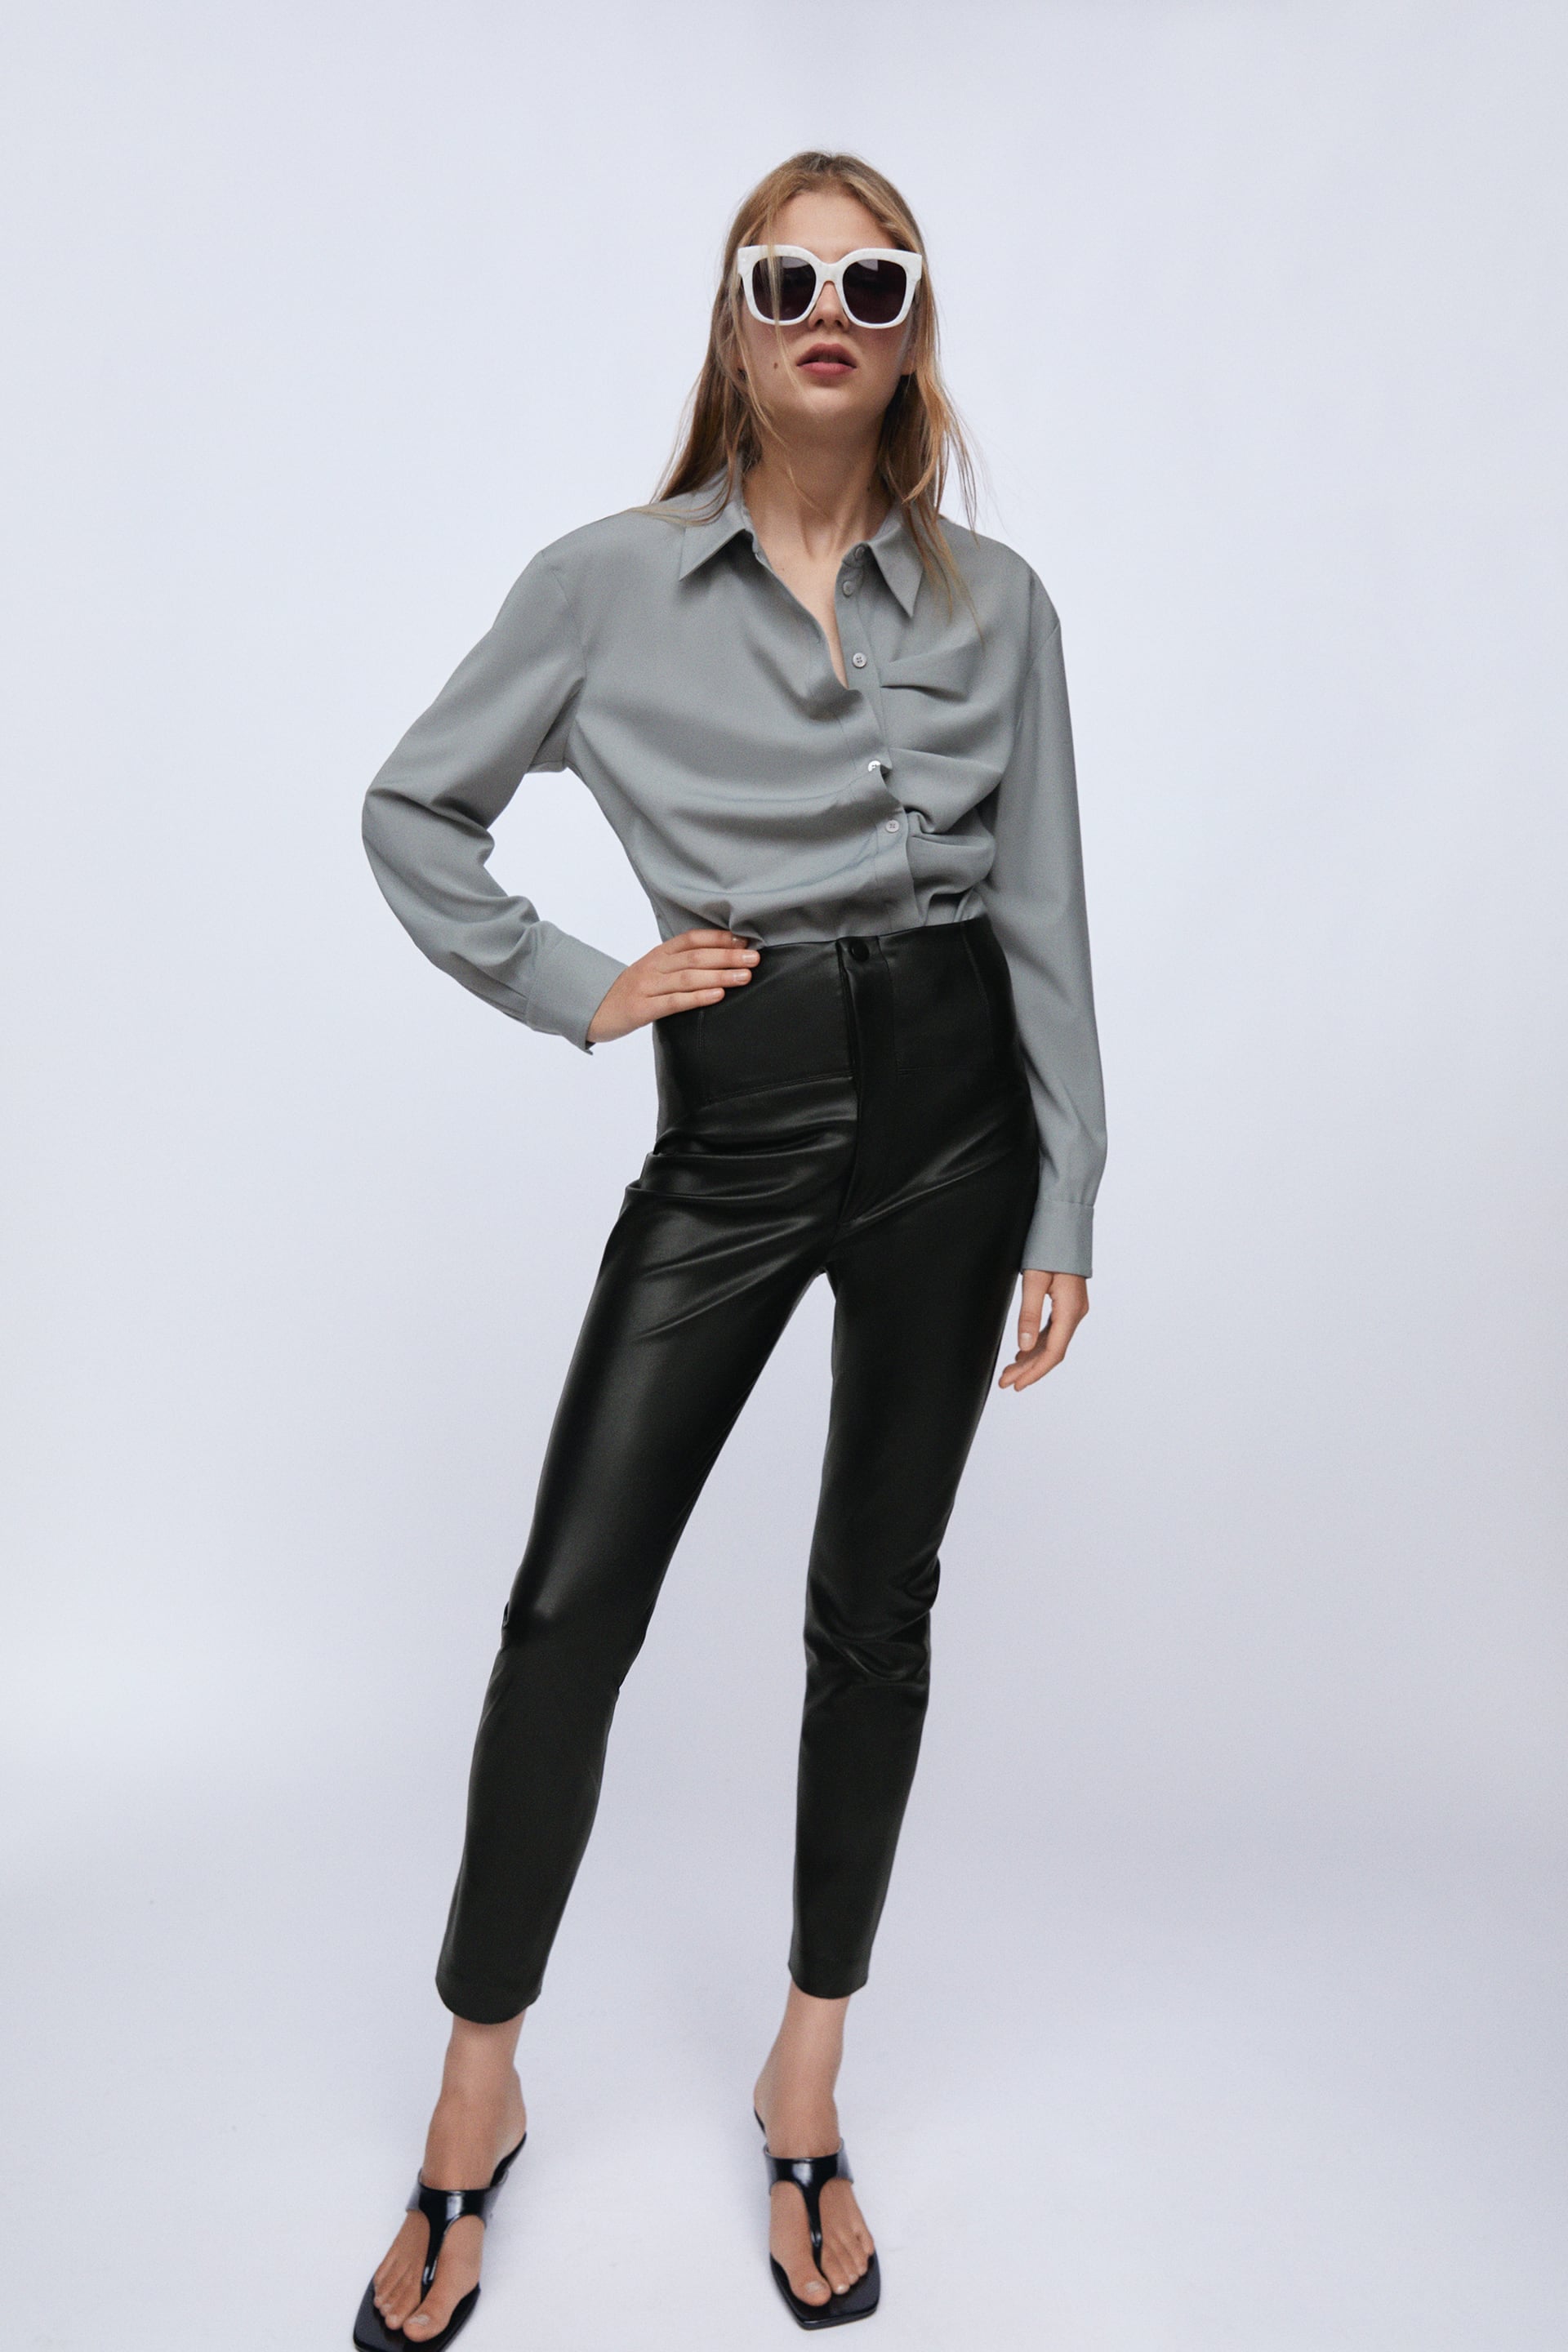 Meghan Markle in a Victoria Beckham Blouse and Leather Pants